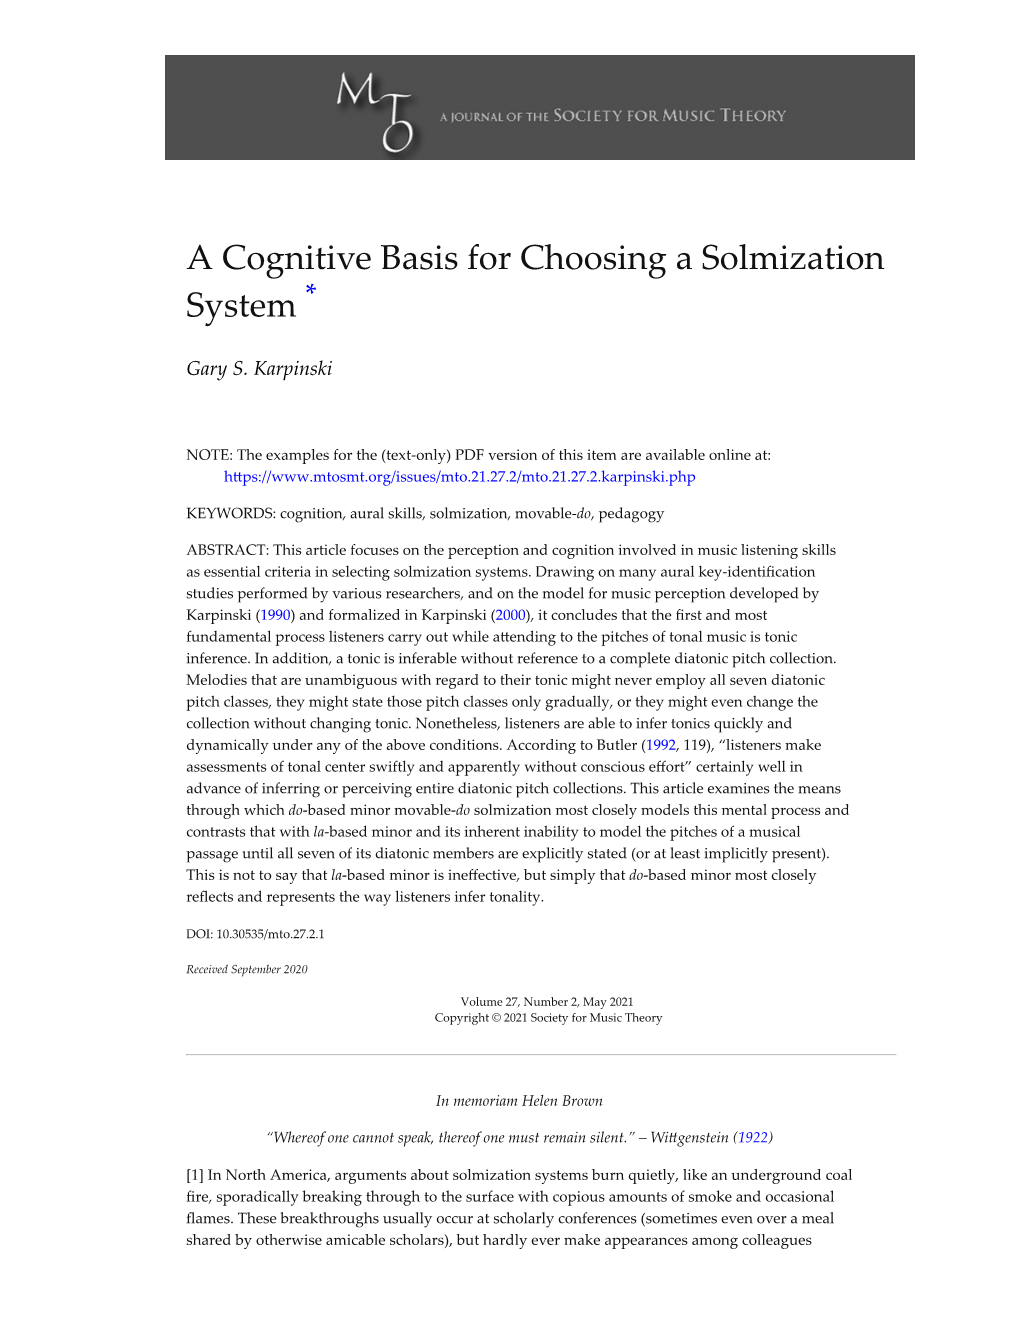 A Cognitive Basis for Choosing a Solmization System *